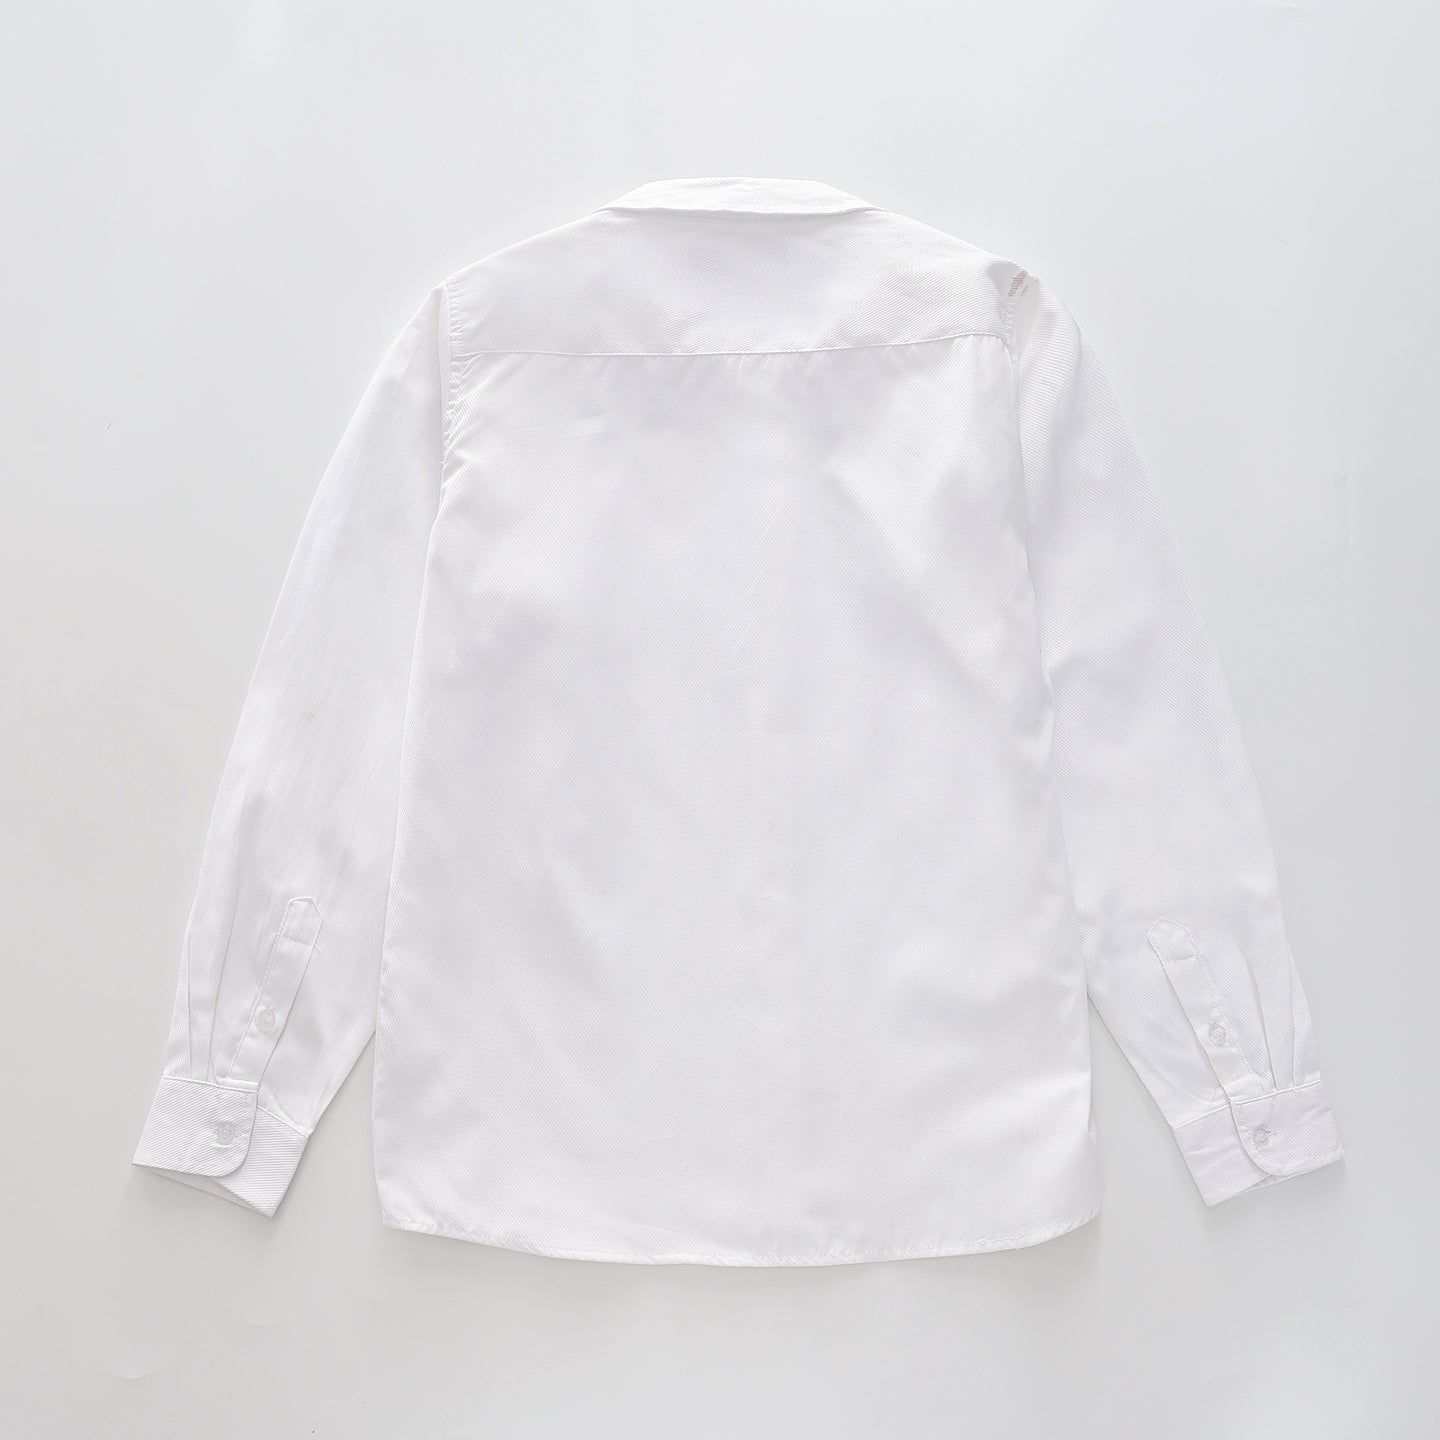 Boys' White Button-Up Dress Shirt 00 - 7 years